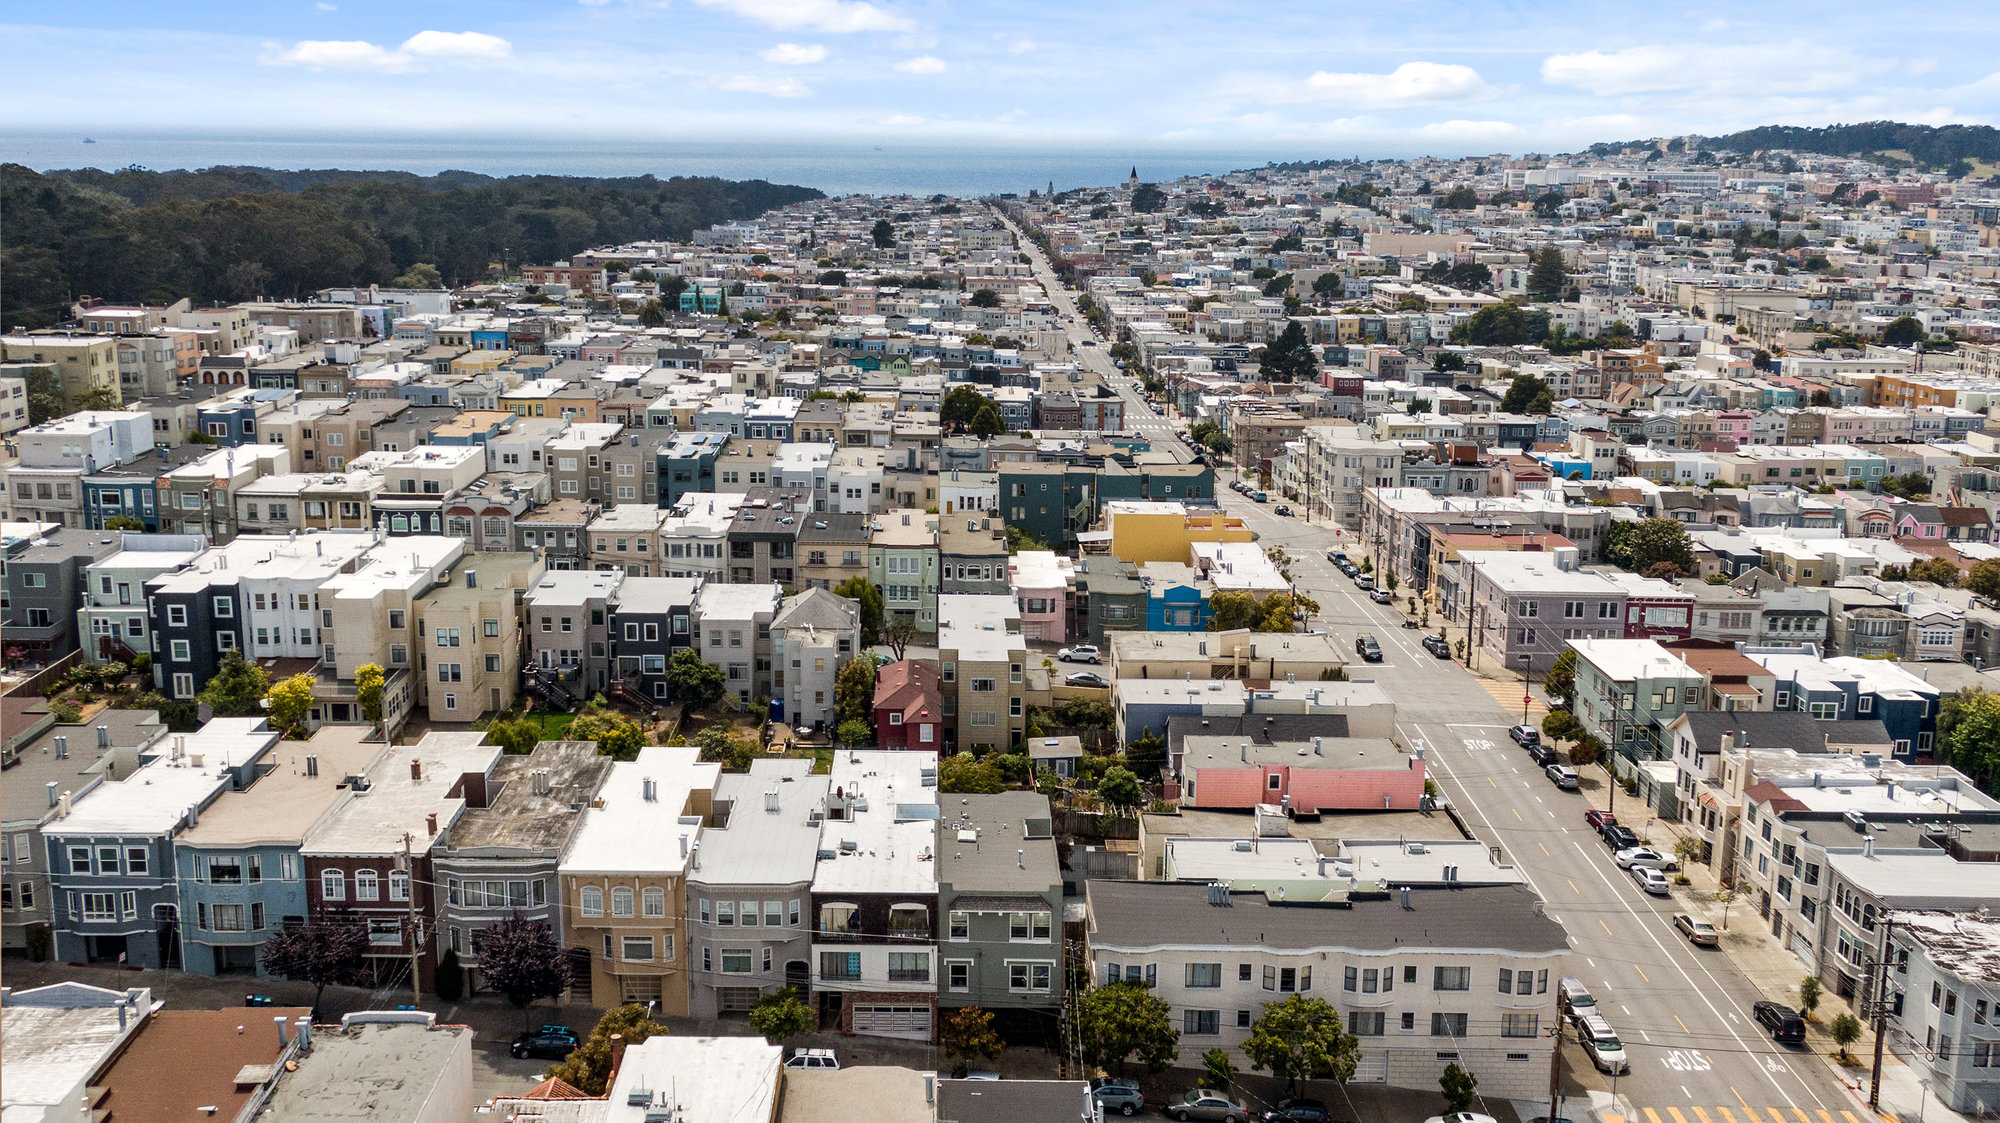 Property Photo: Aerial view of the Richmond District in San Francisco, including 719 18th Avenue and a view of Ocean Beach